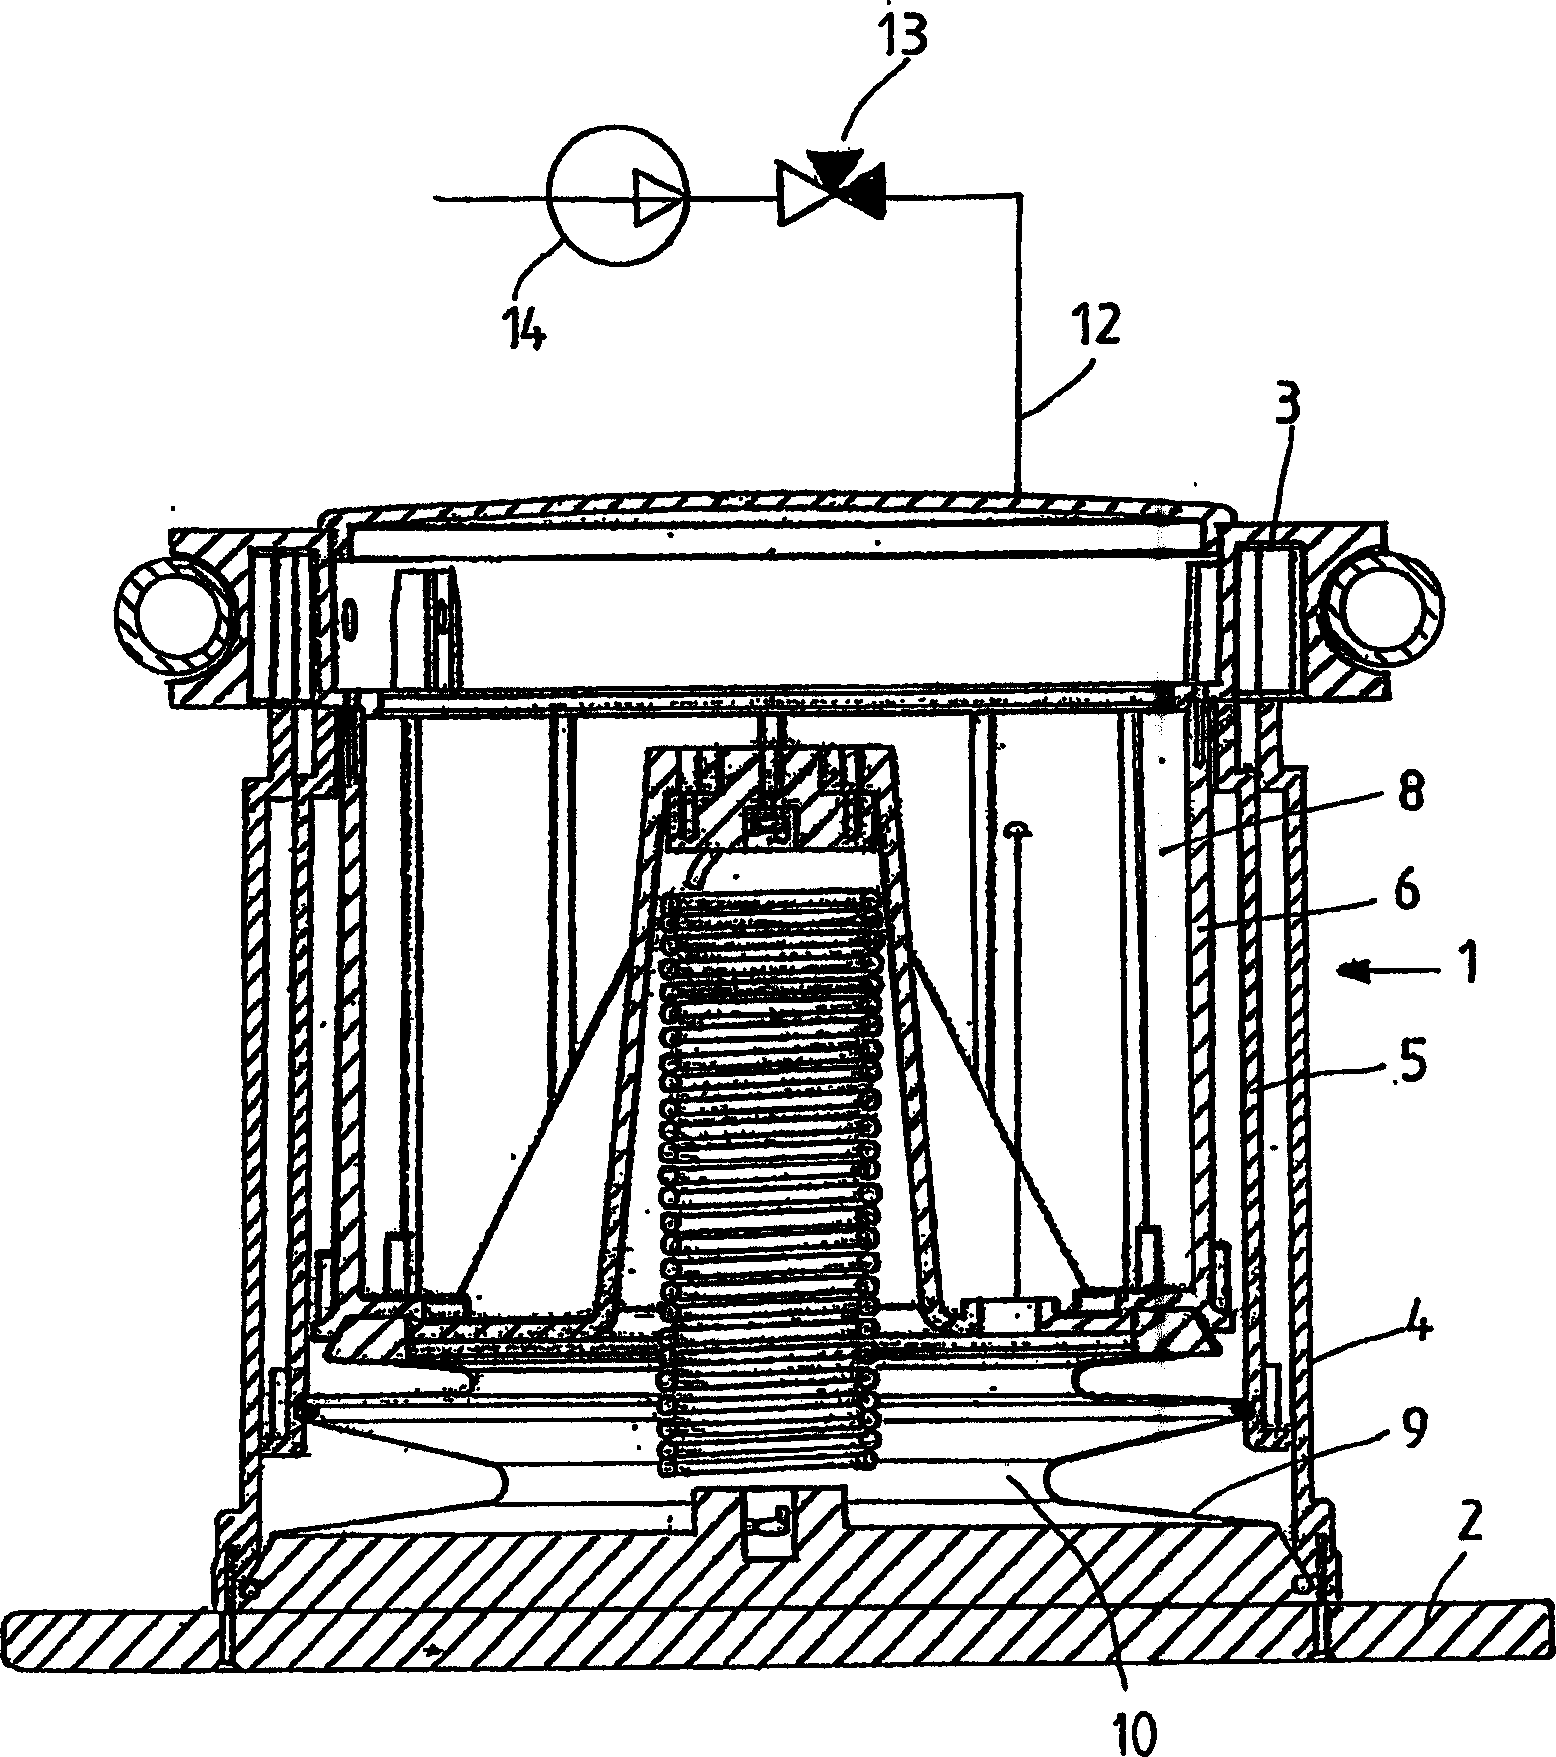 Pressing cylinder, preferably for use in a refuse compressor